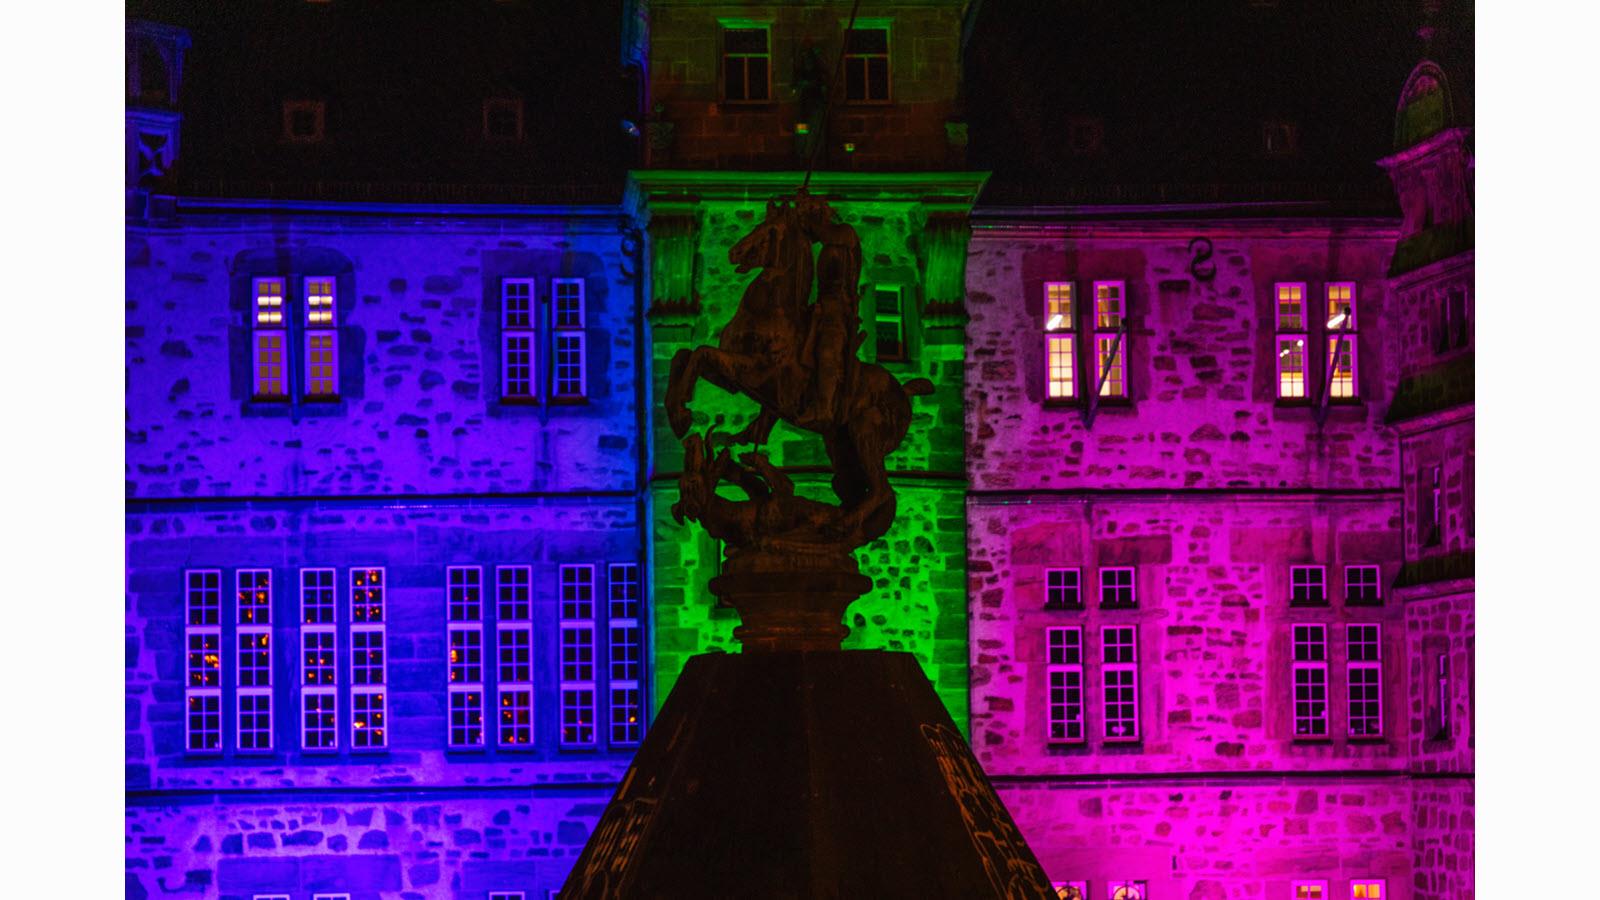 A rooftop finial against the illuminated Town Hall in Marburg, Germany, on Rare Disease Day.